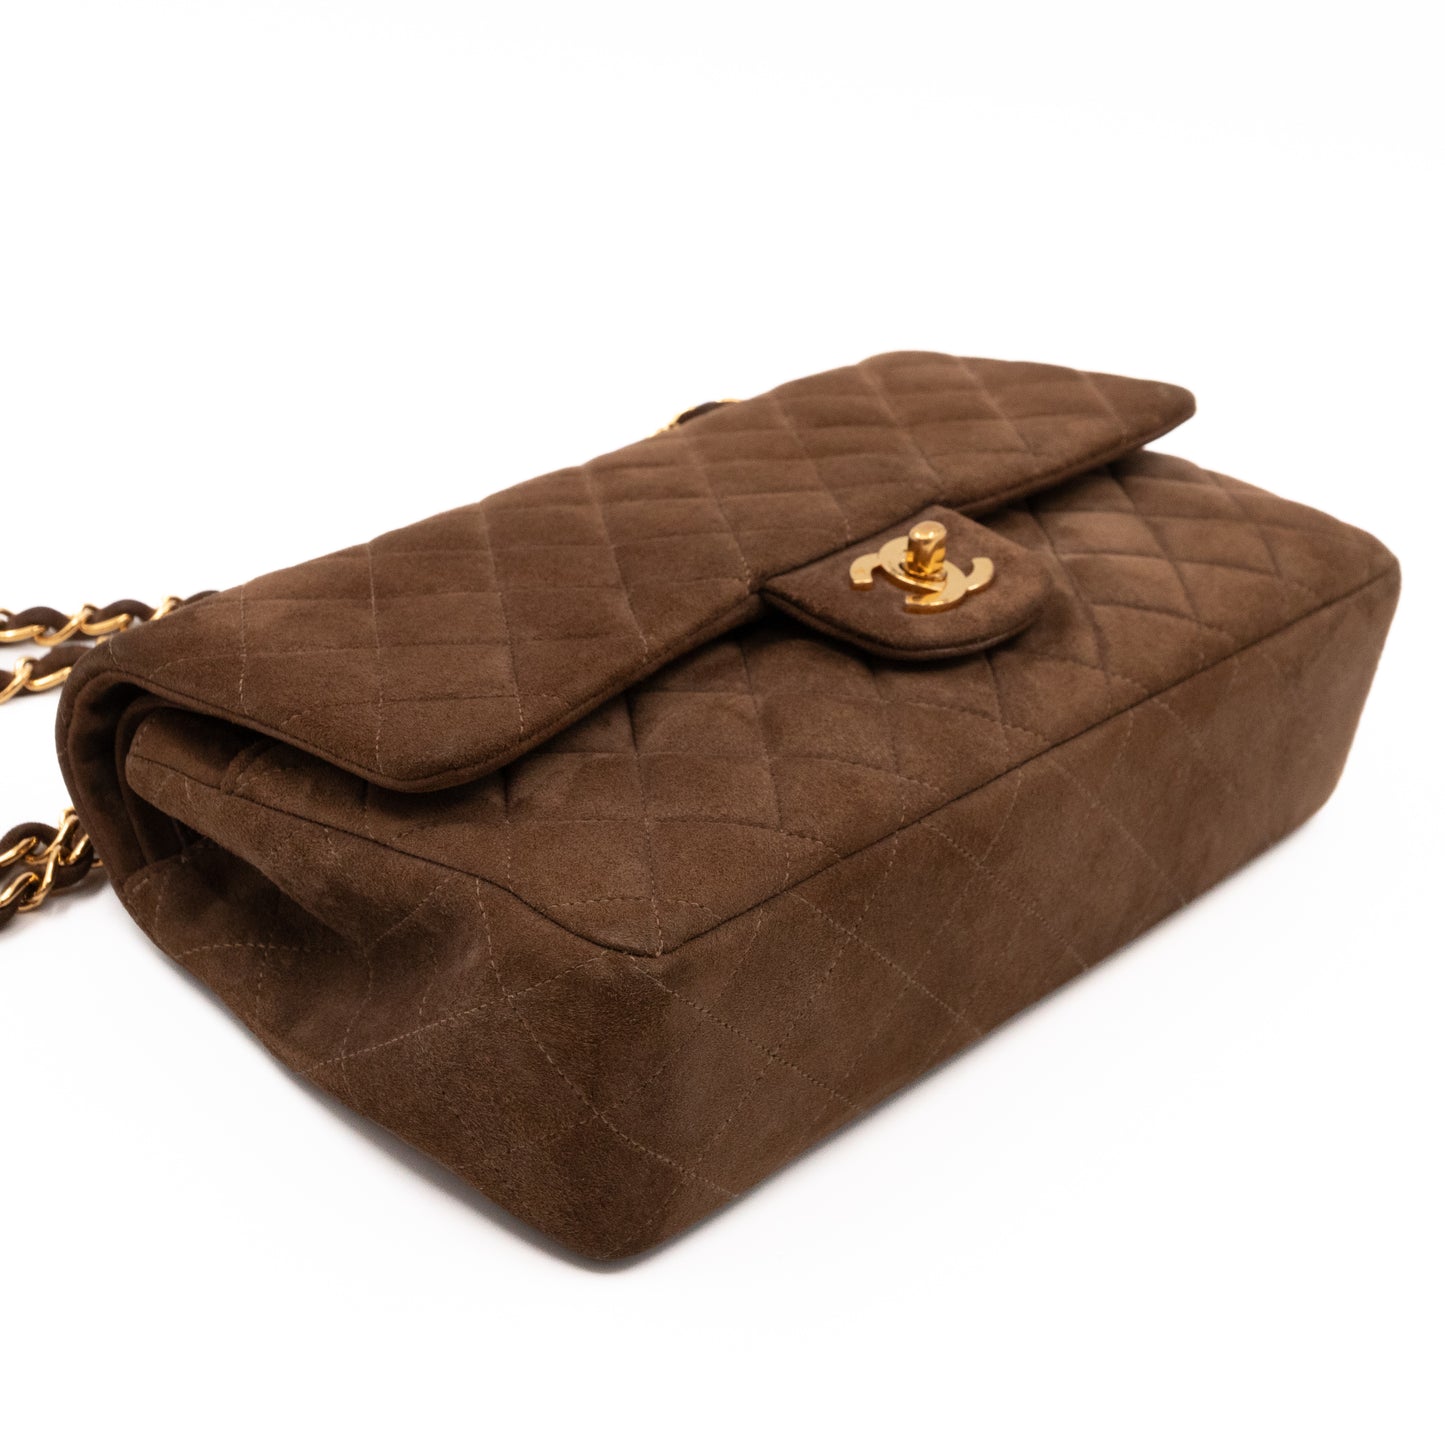 Classic Double Flap Bag Medium Brown Suede Leather Gold